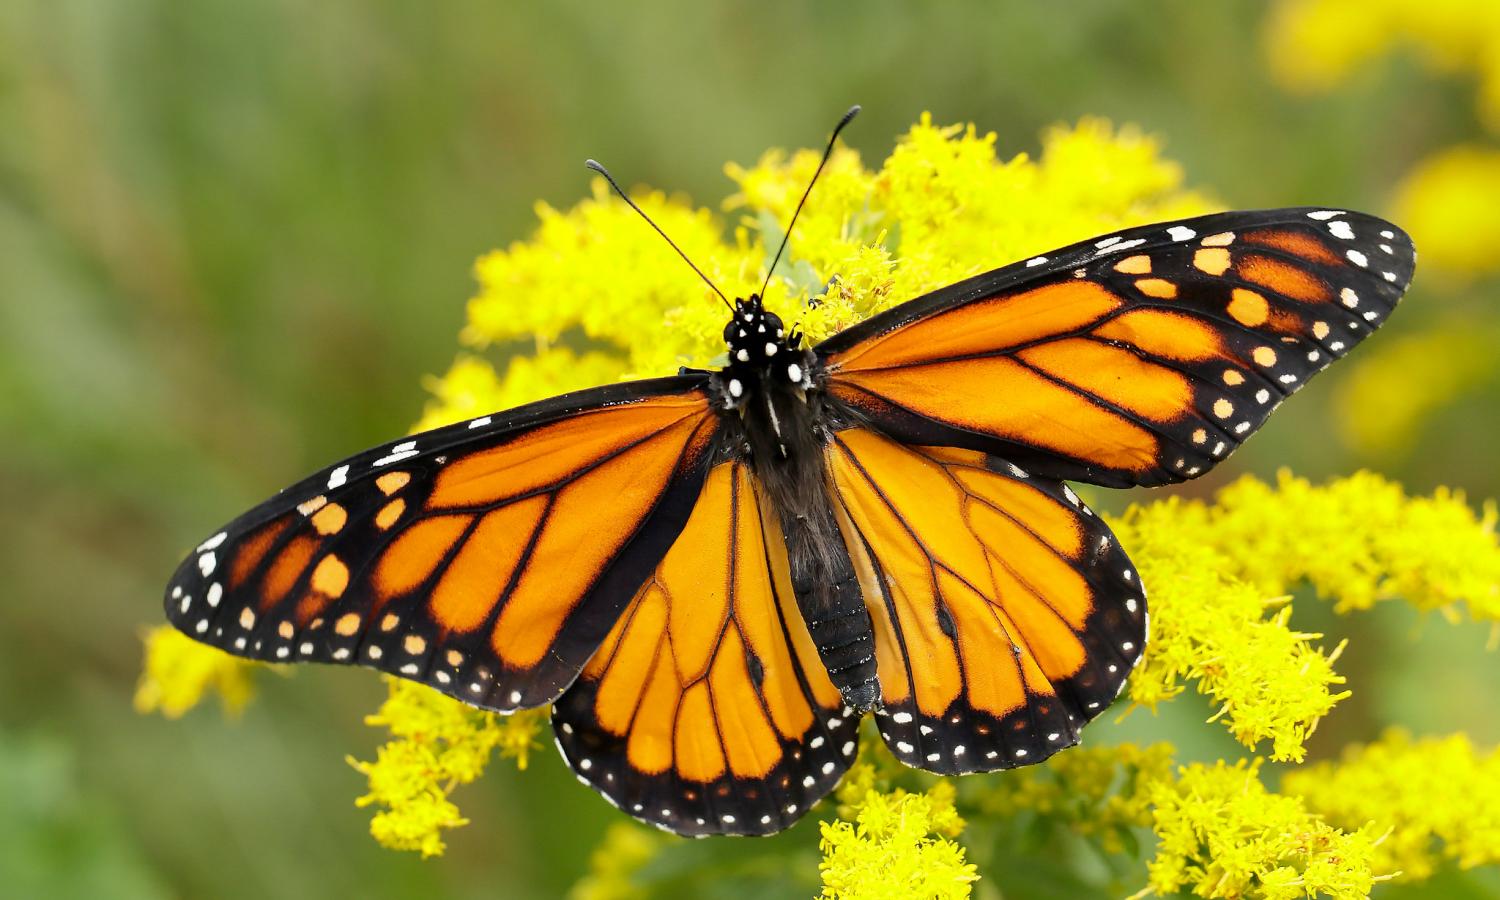 A vibrant monarch butterfly rests on a yellow flower. Image depicts nature's beauty and the delicate balance of life